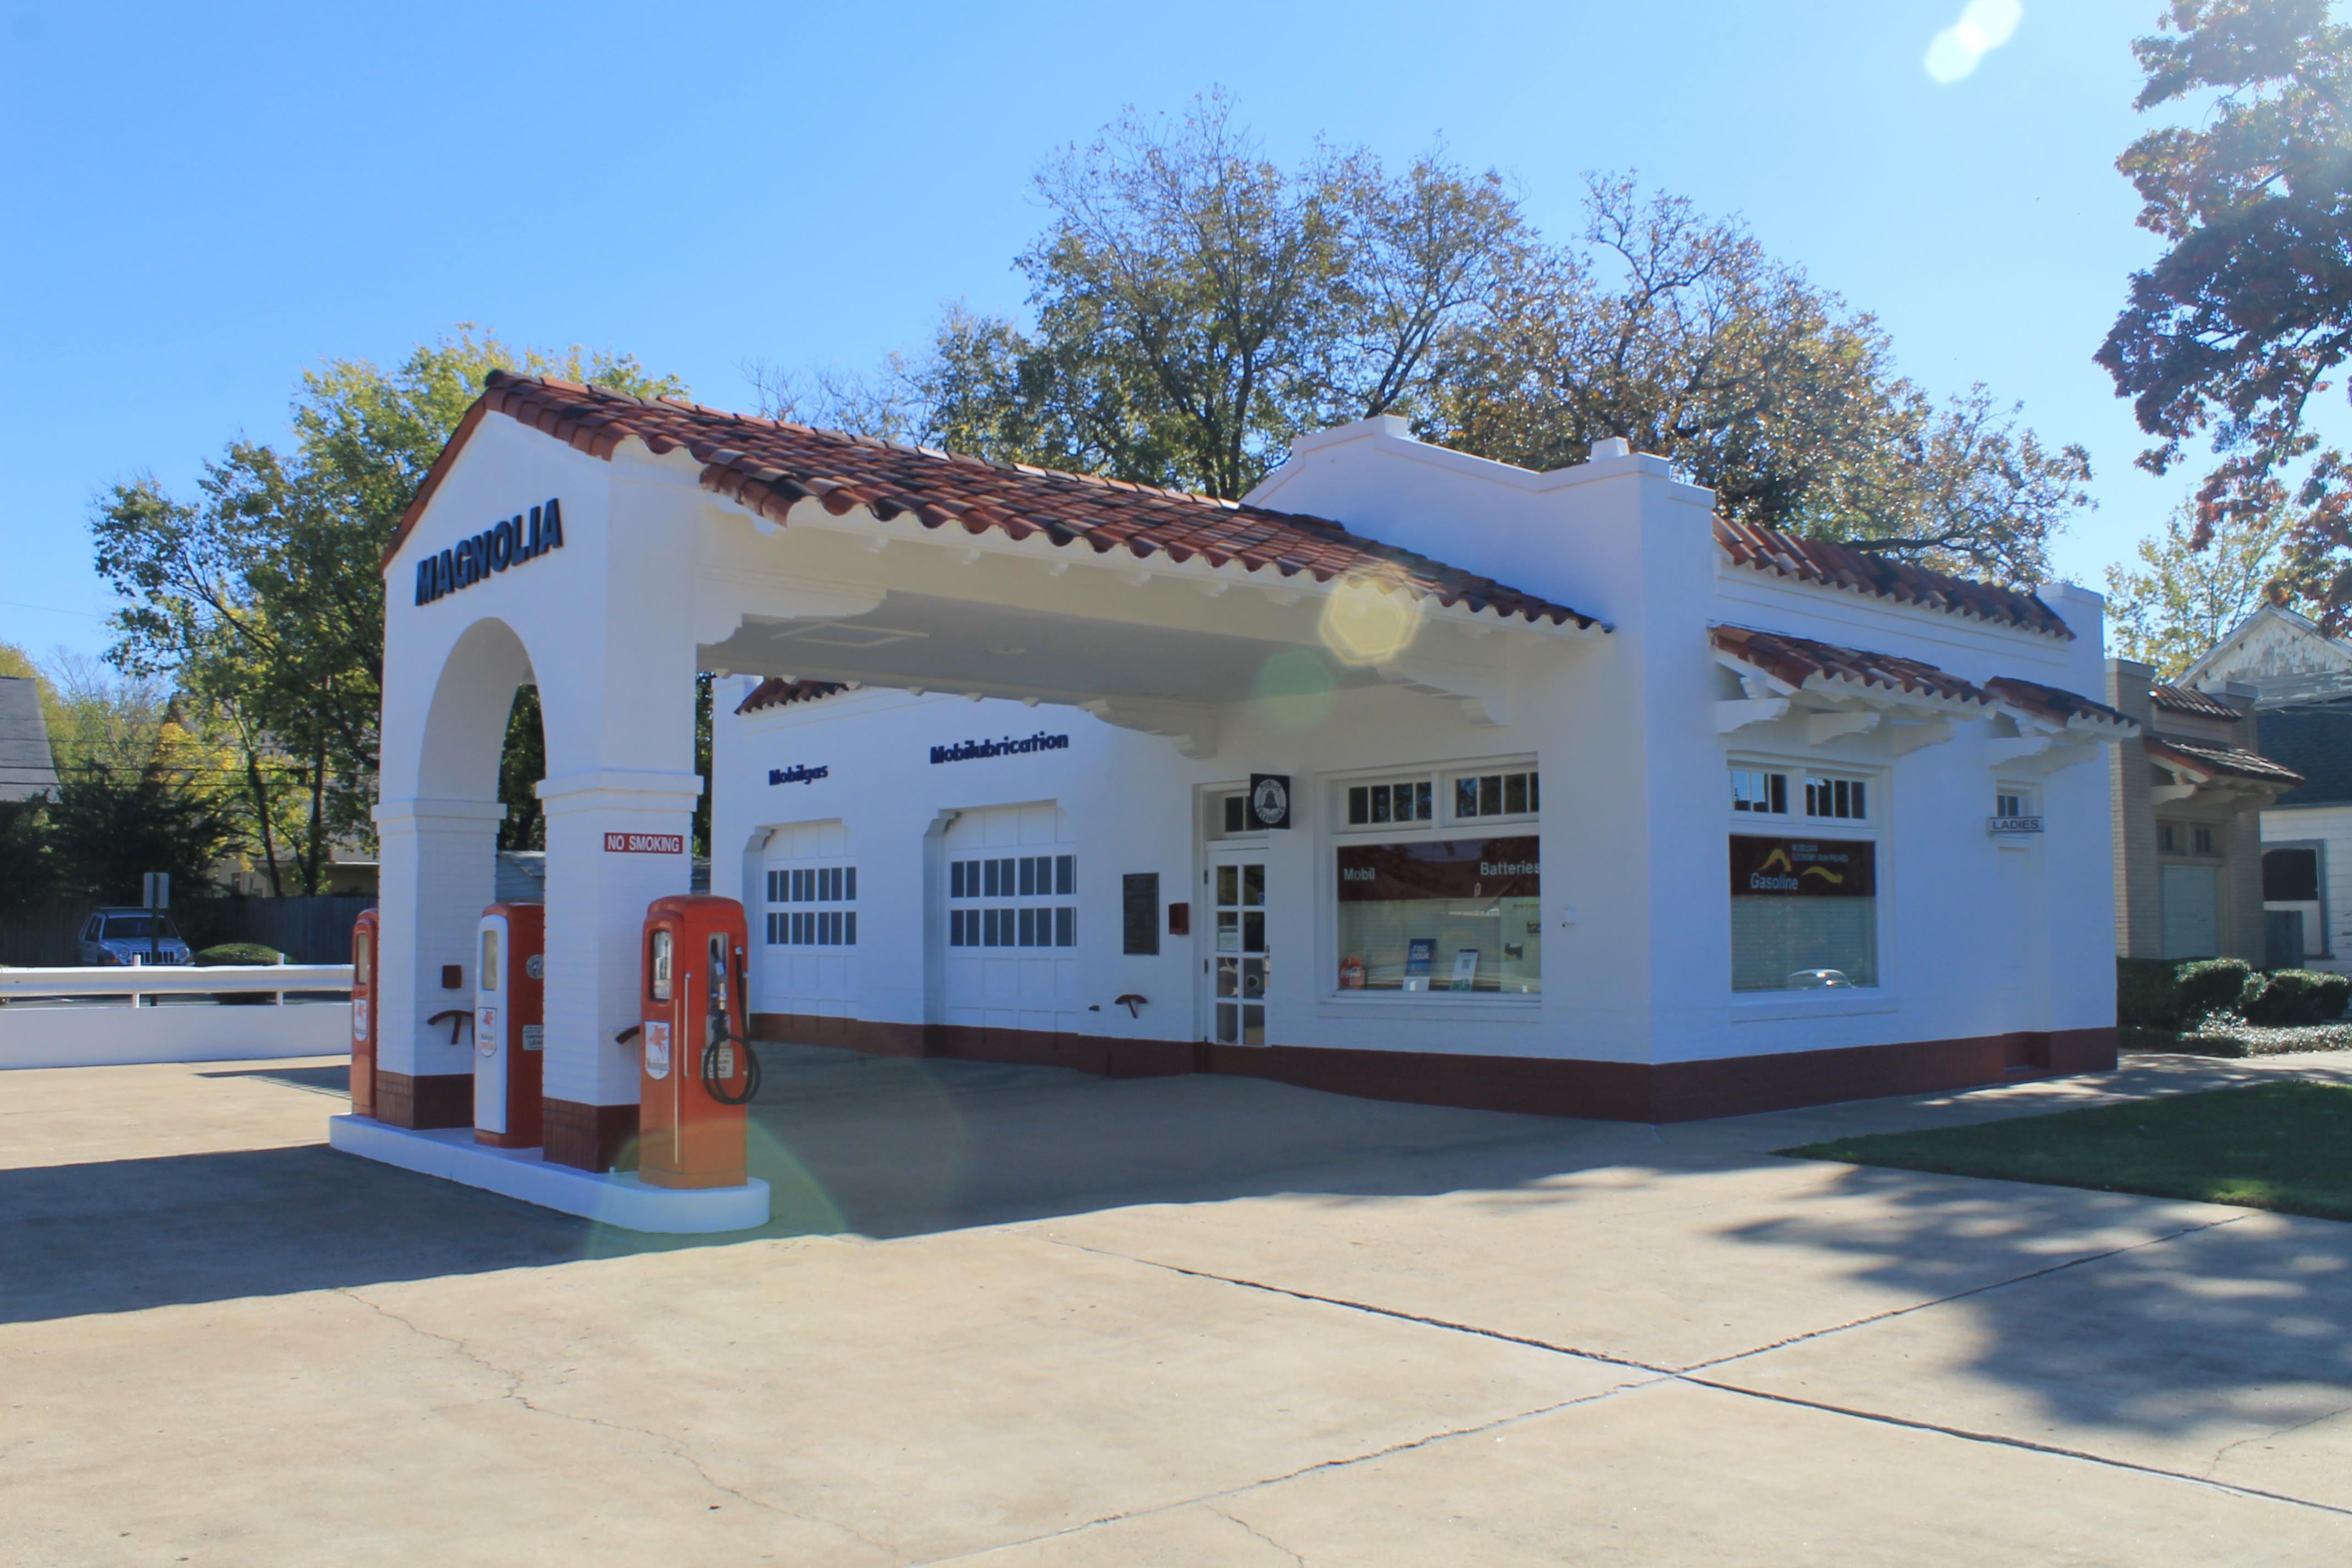 The Magnolia Mobil Gas Station, a white stucco facility with terracotta roof